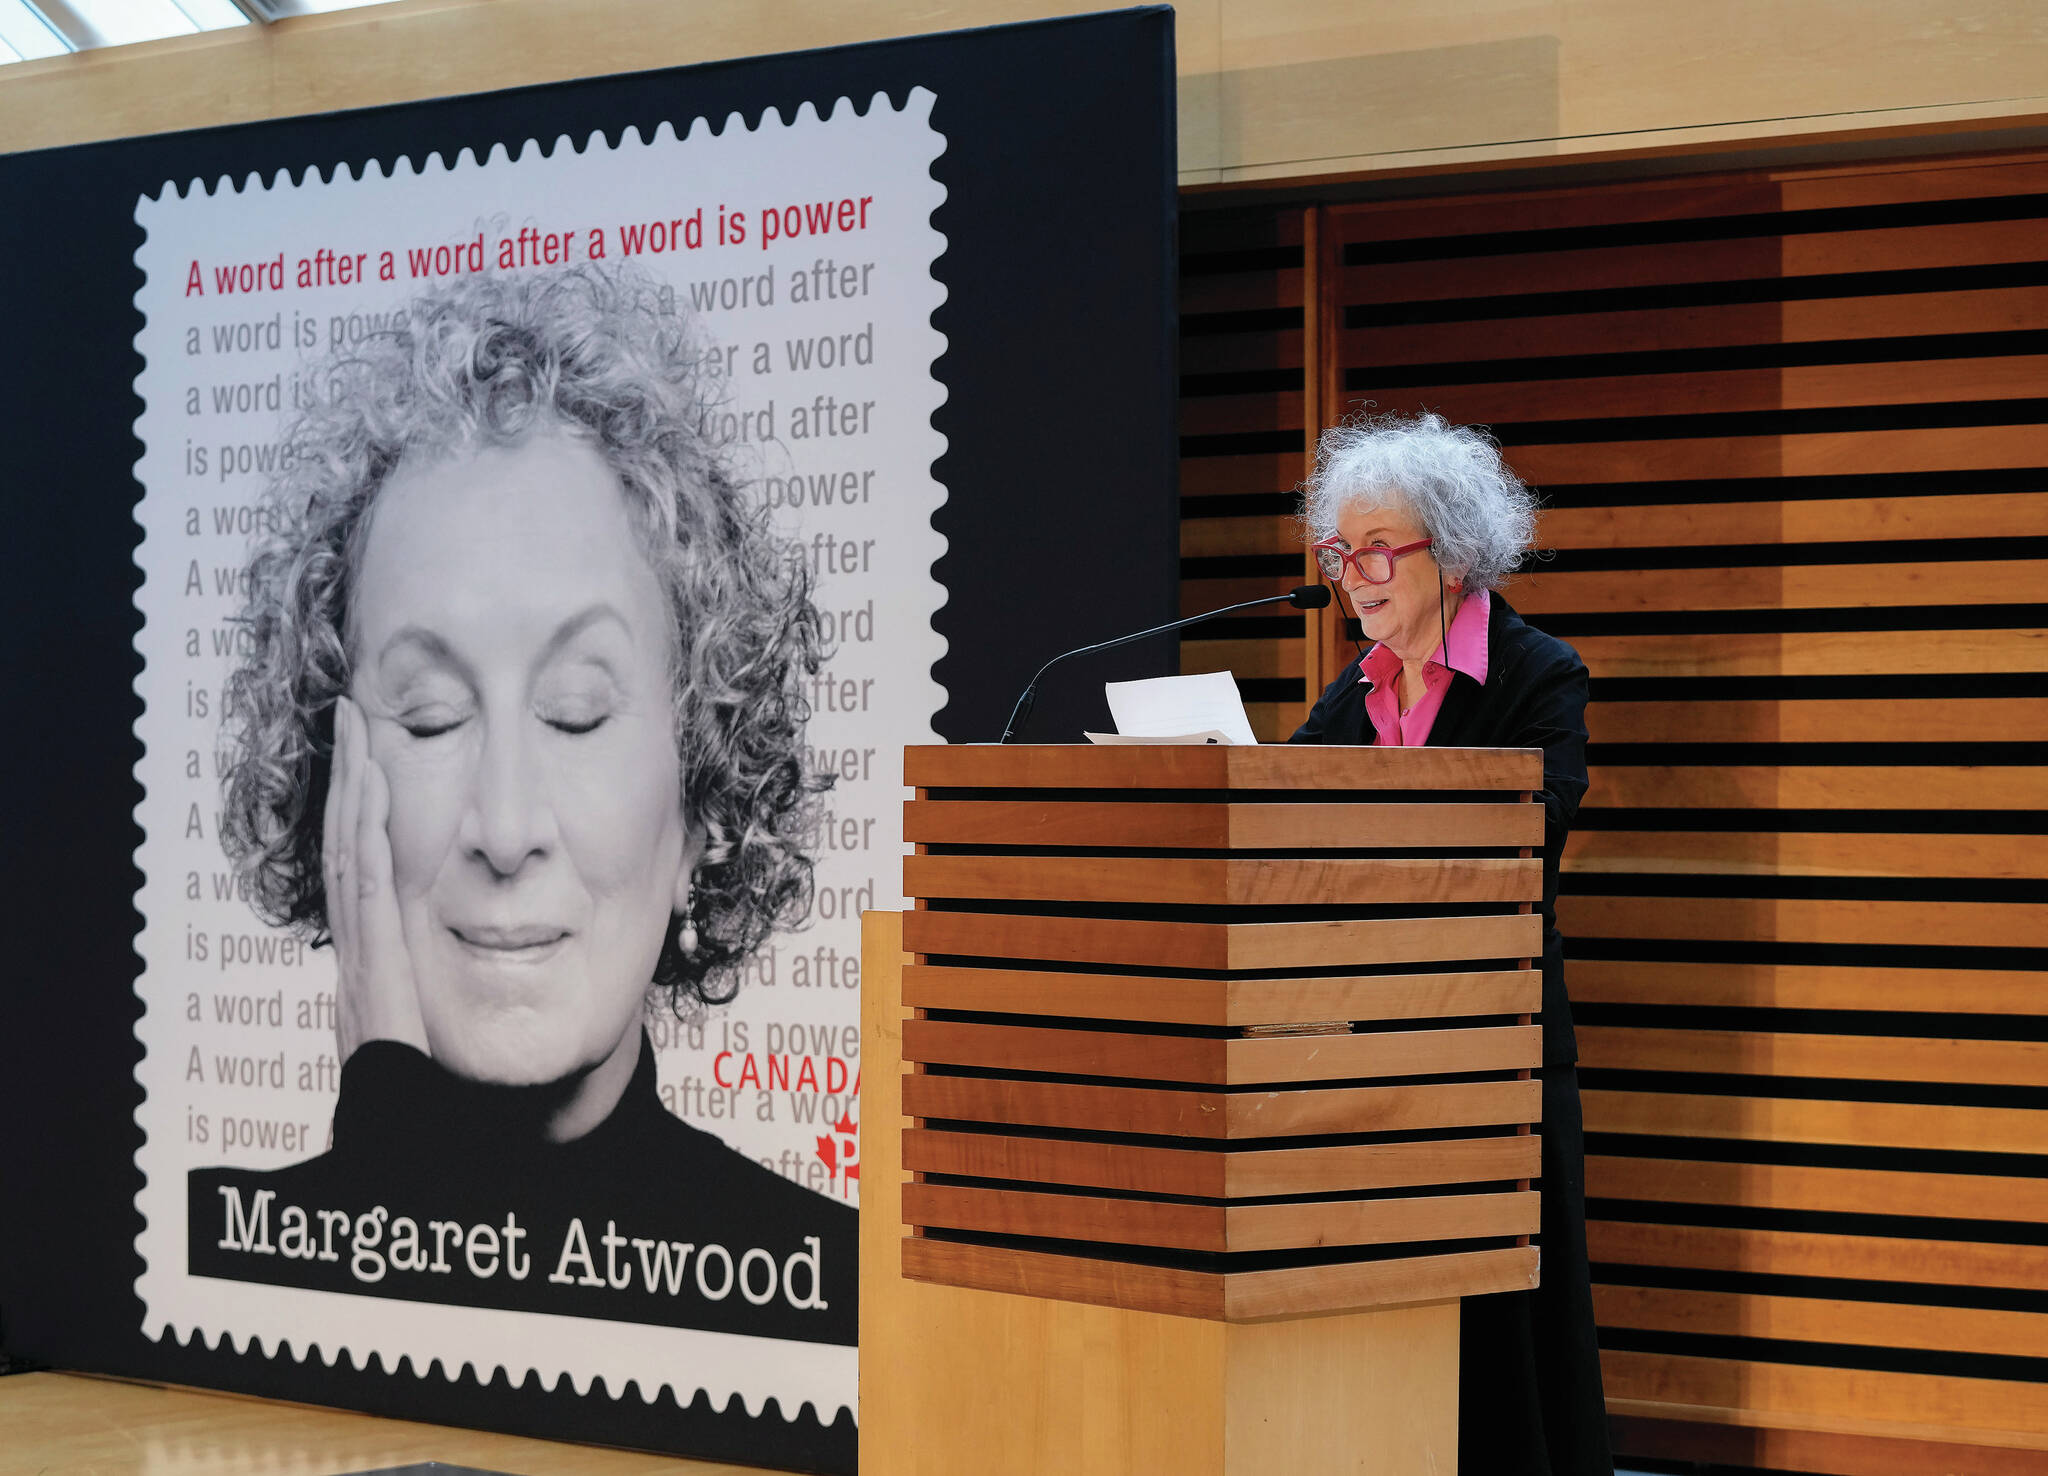 Renowned Canadian writer, Margaret Atwood speaks after Canada Post unveiling of a special stamp in her honour in Toronto on Nov. 25, 2021. (THE CANADIAN PRESS/Nathan Denette)